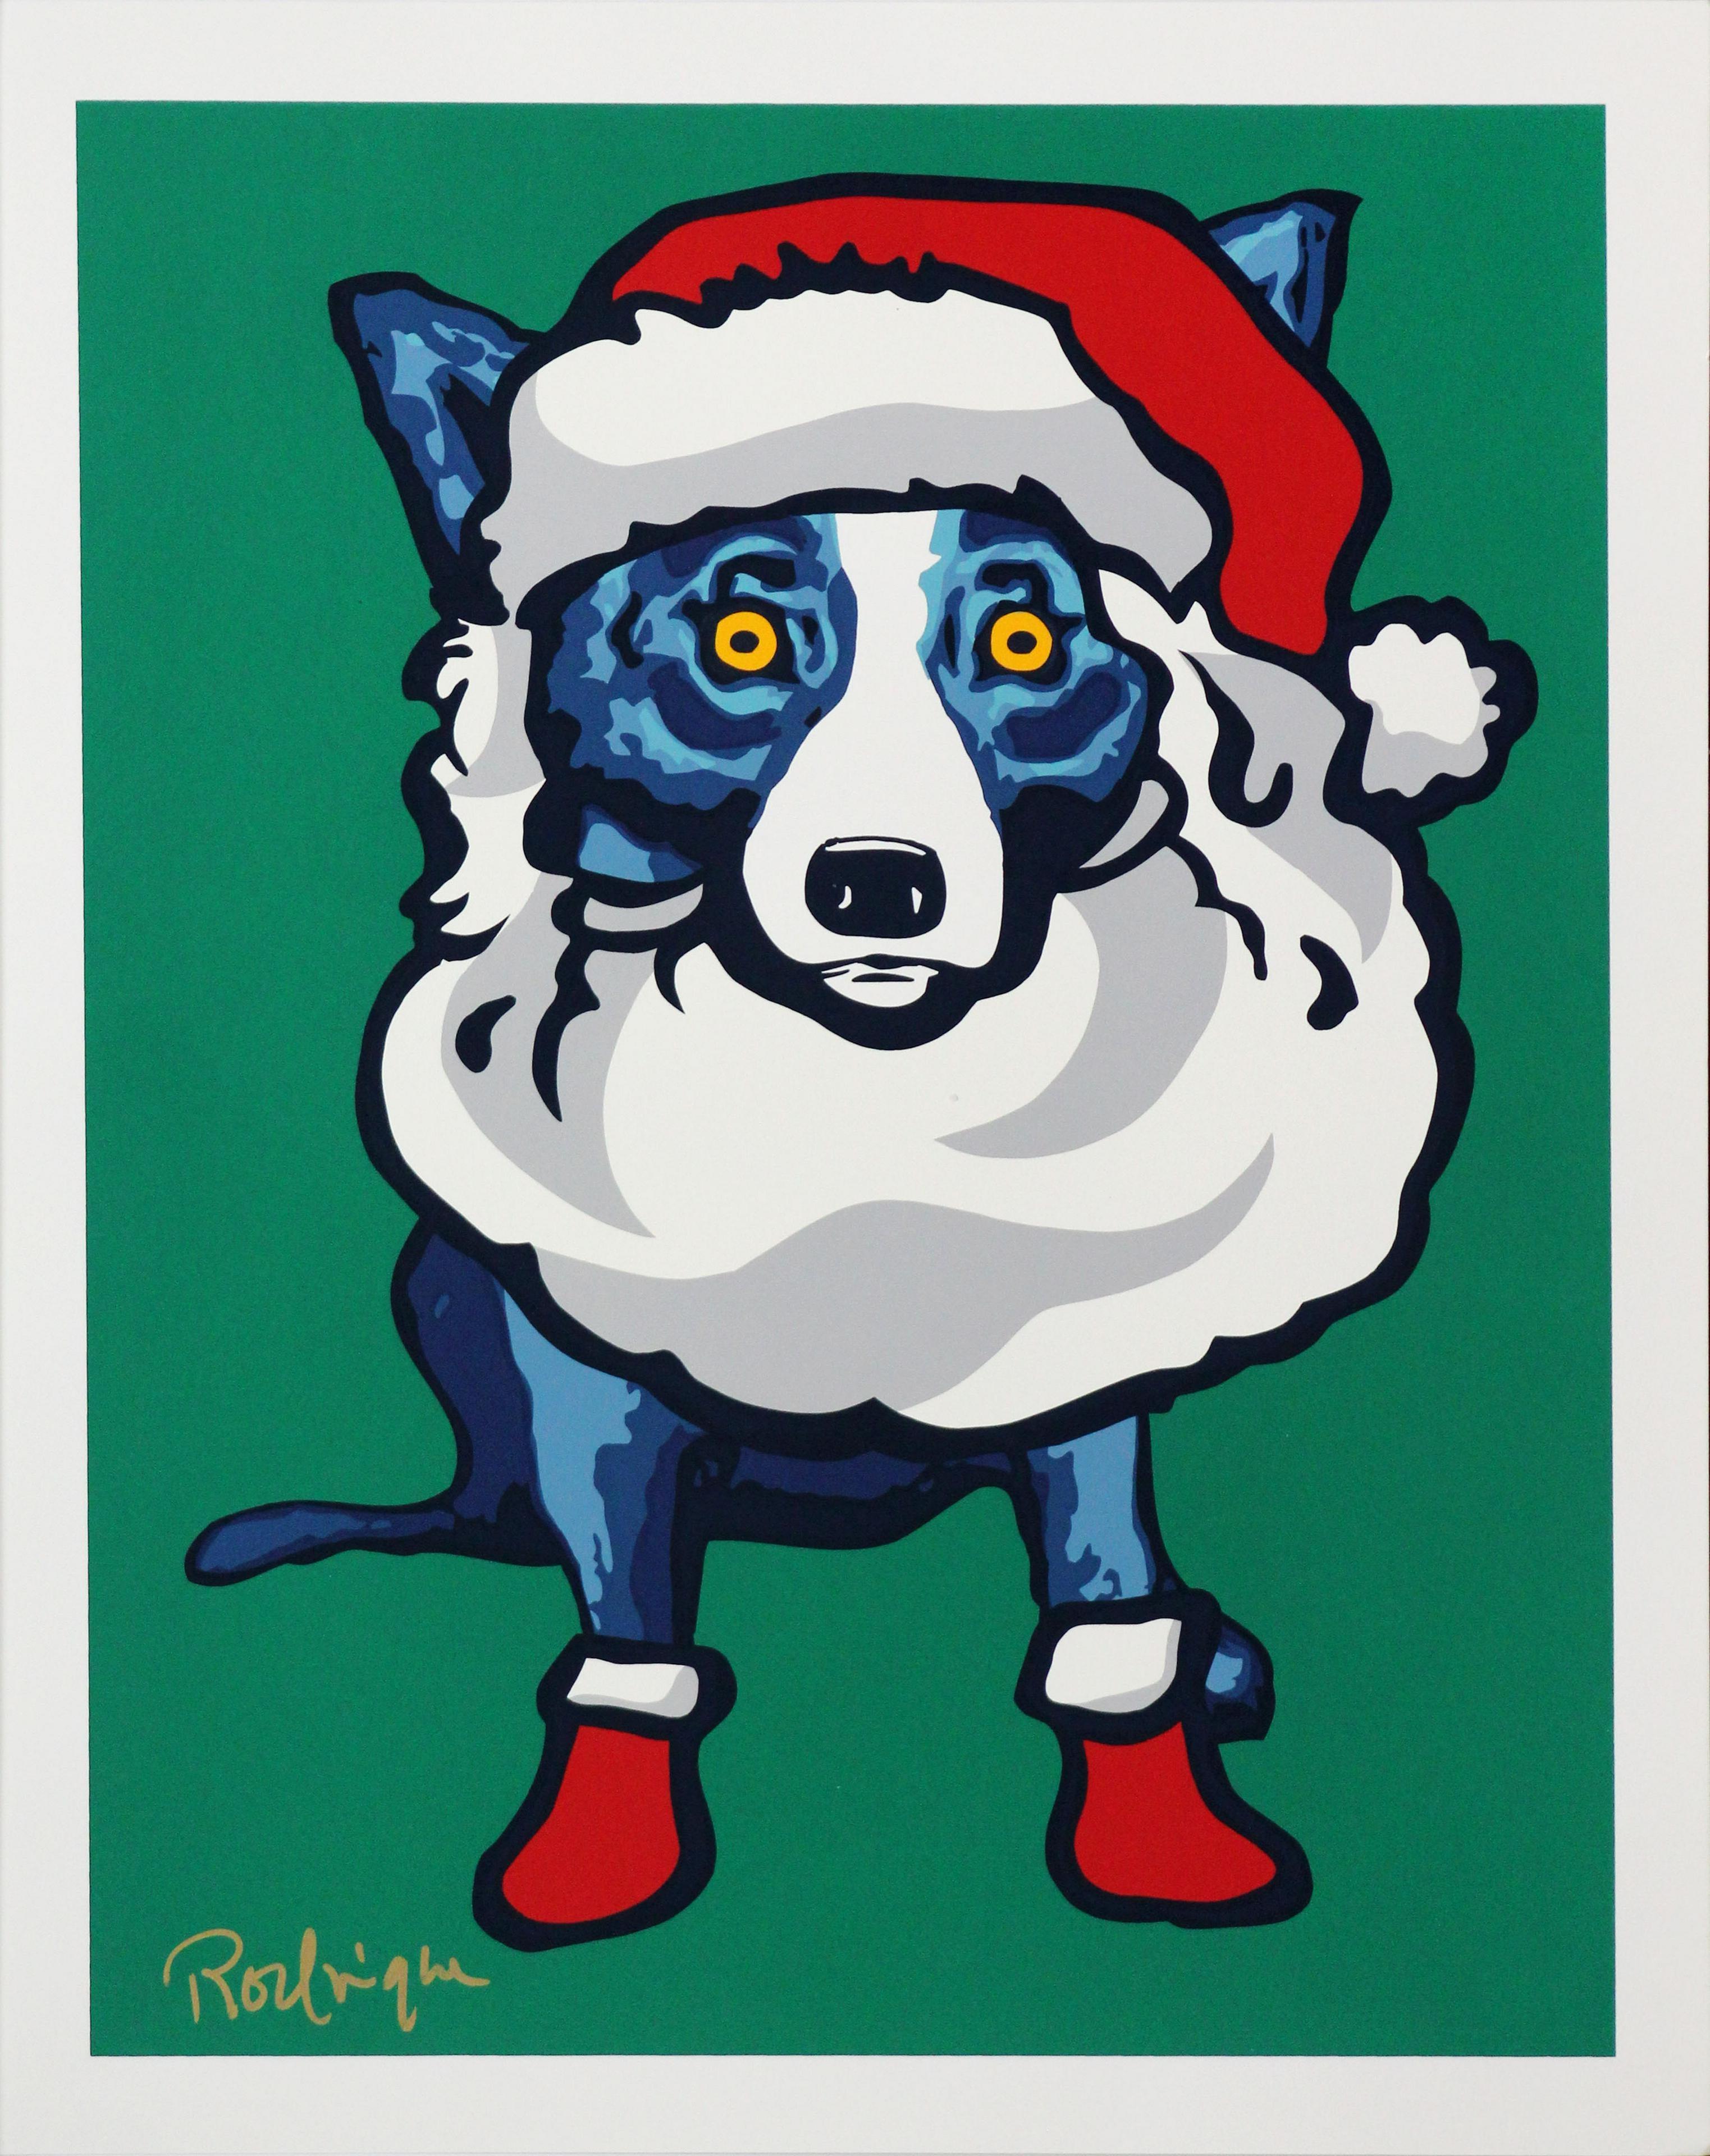 Artist: George Rodrigue

	
Title: Ho Ho Ho

	
Year: 2000

	
Dimensions: 20in. by 16in.

	
Edition: From the rare limited edition of 150

	
Medium: Original serigraph on paper

	
Condition: Excellent

	
Signature Details: Hand signed and numbered by